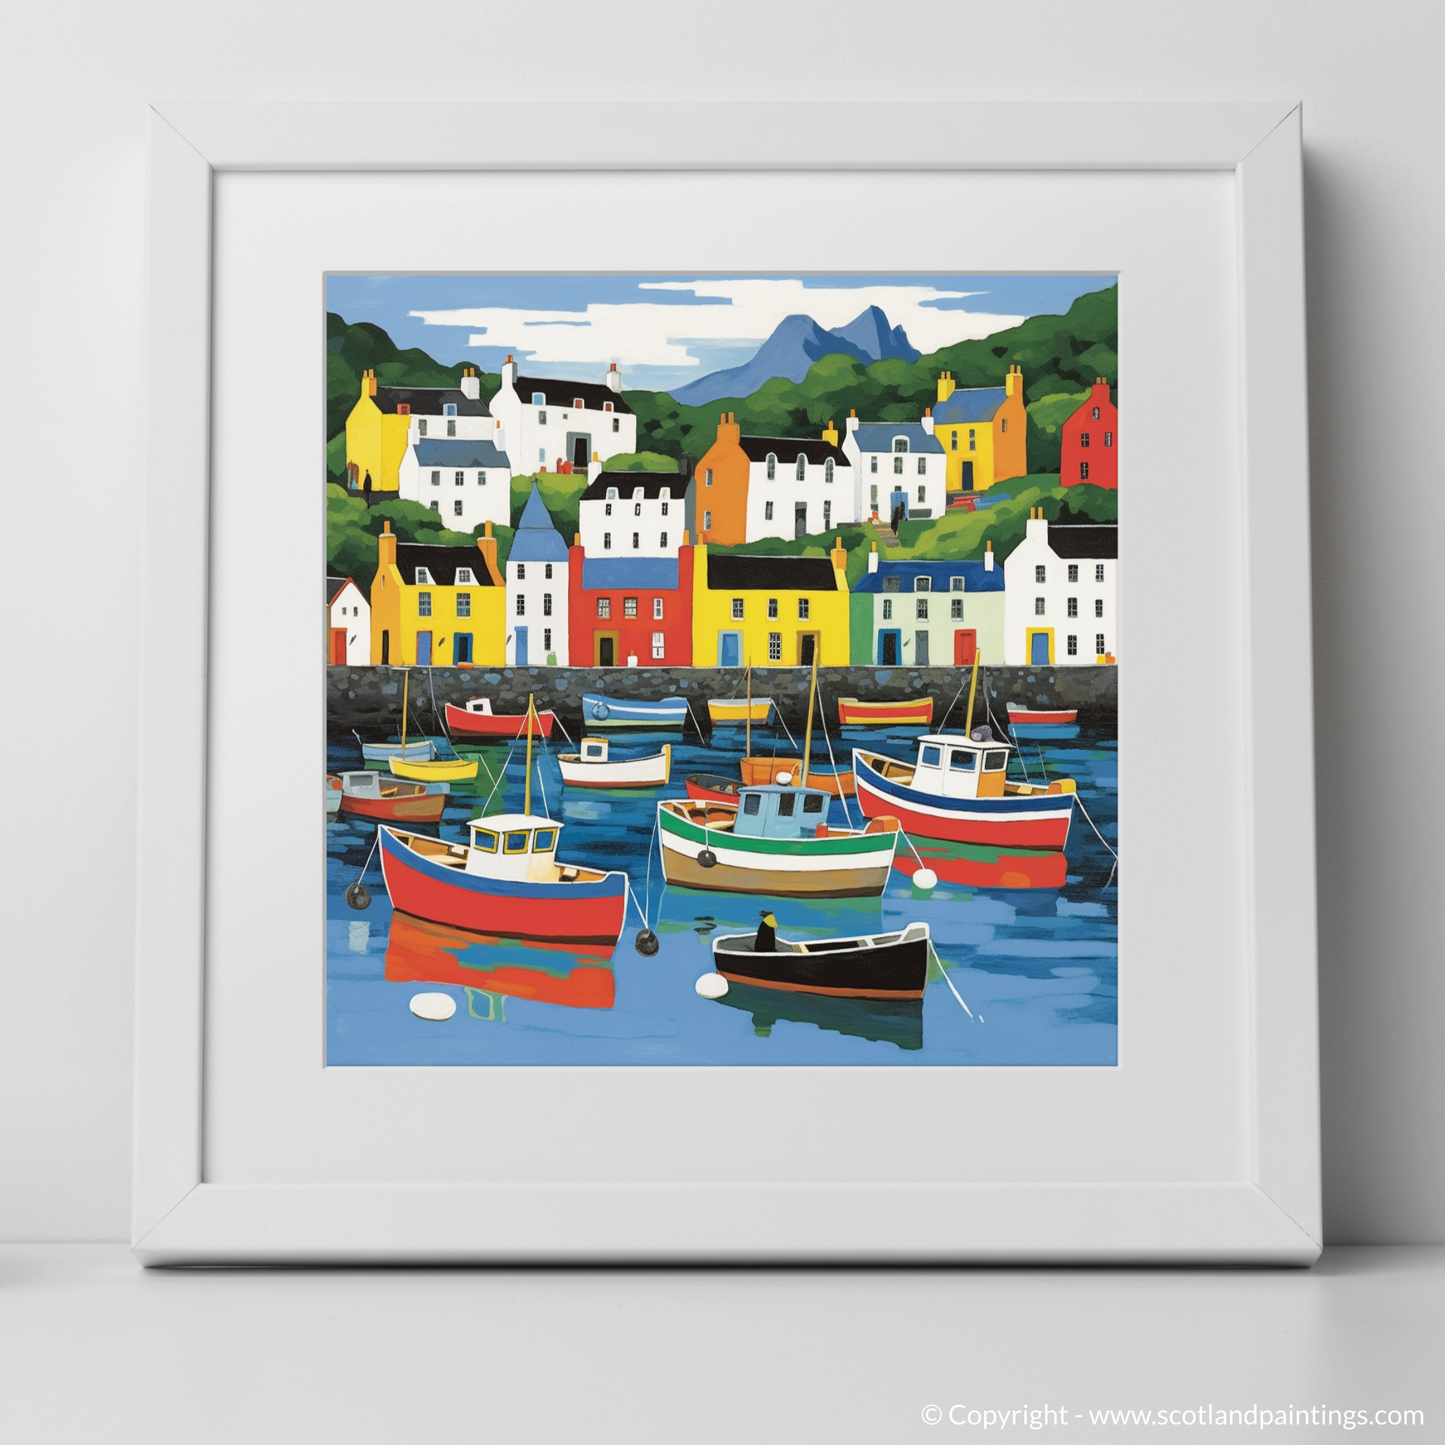 Vibrant Portree: A Pop Art Tribute to Isle of Skye's Picturesque Harbour